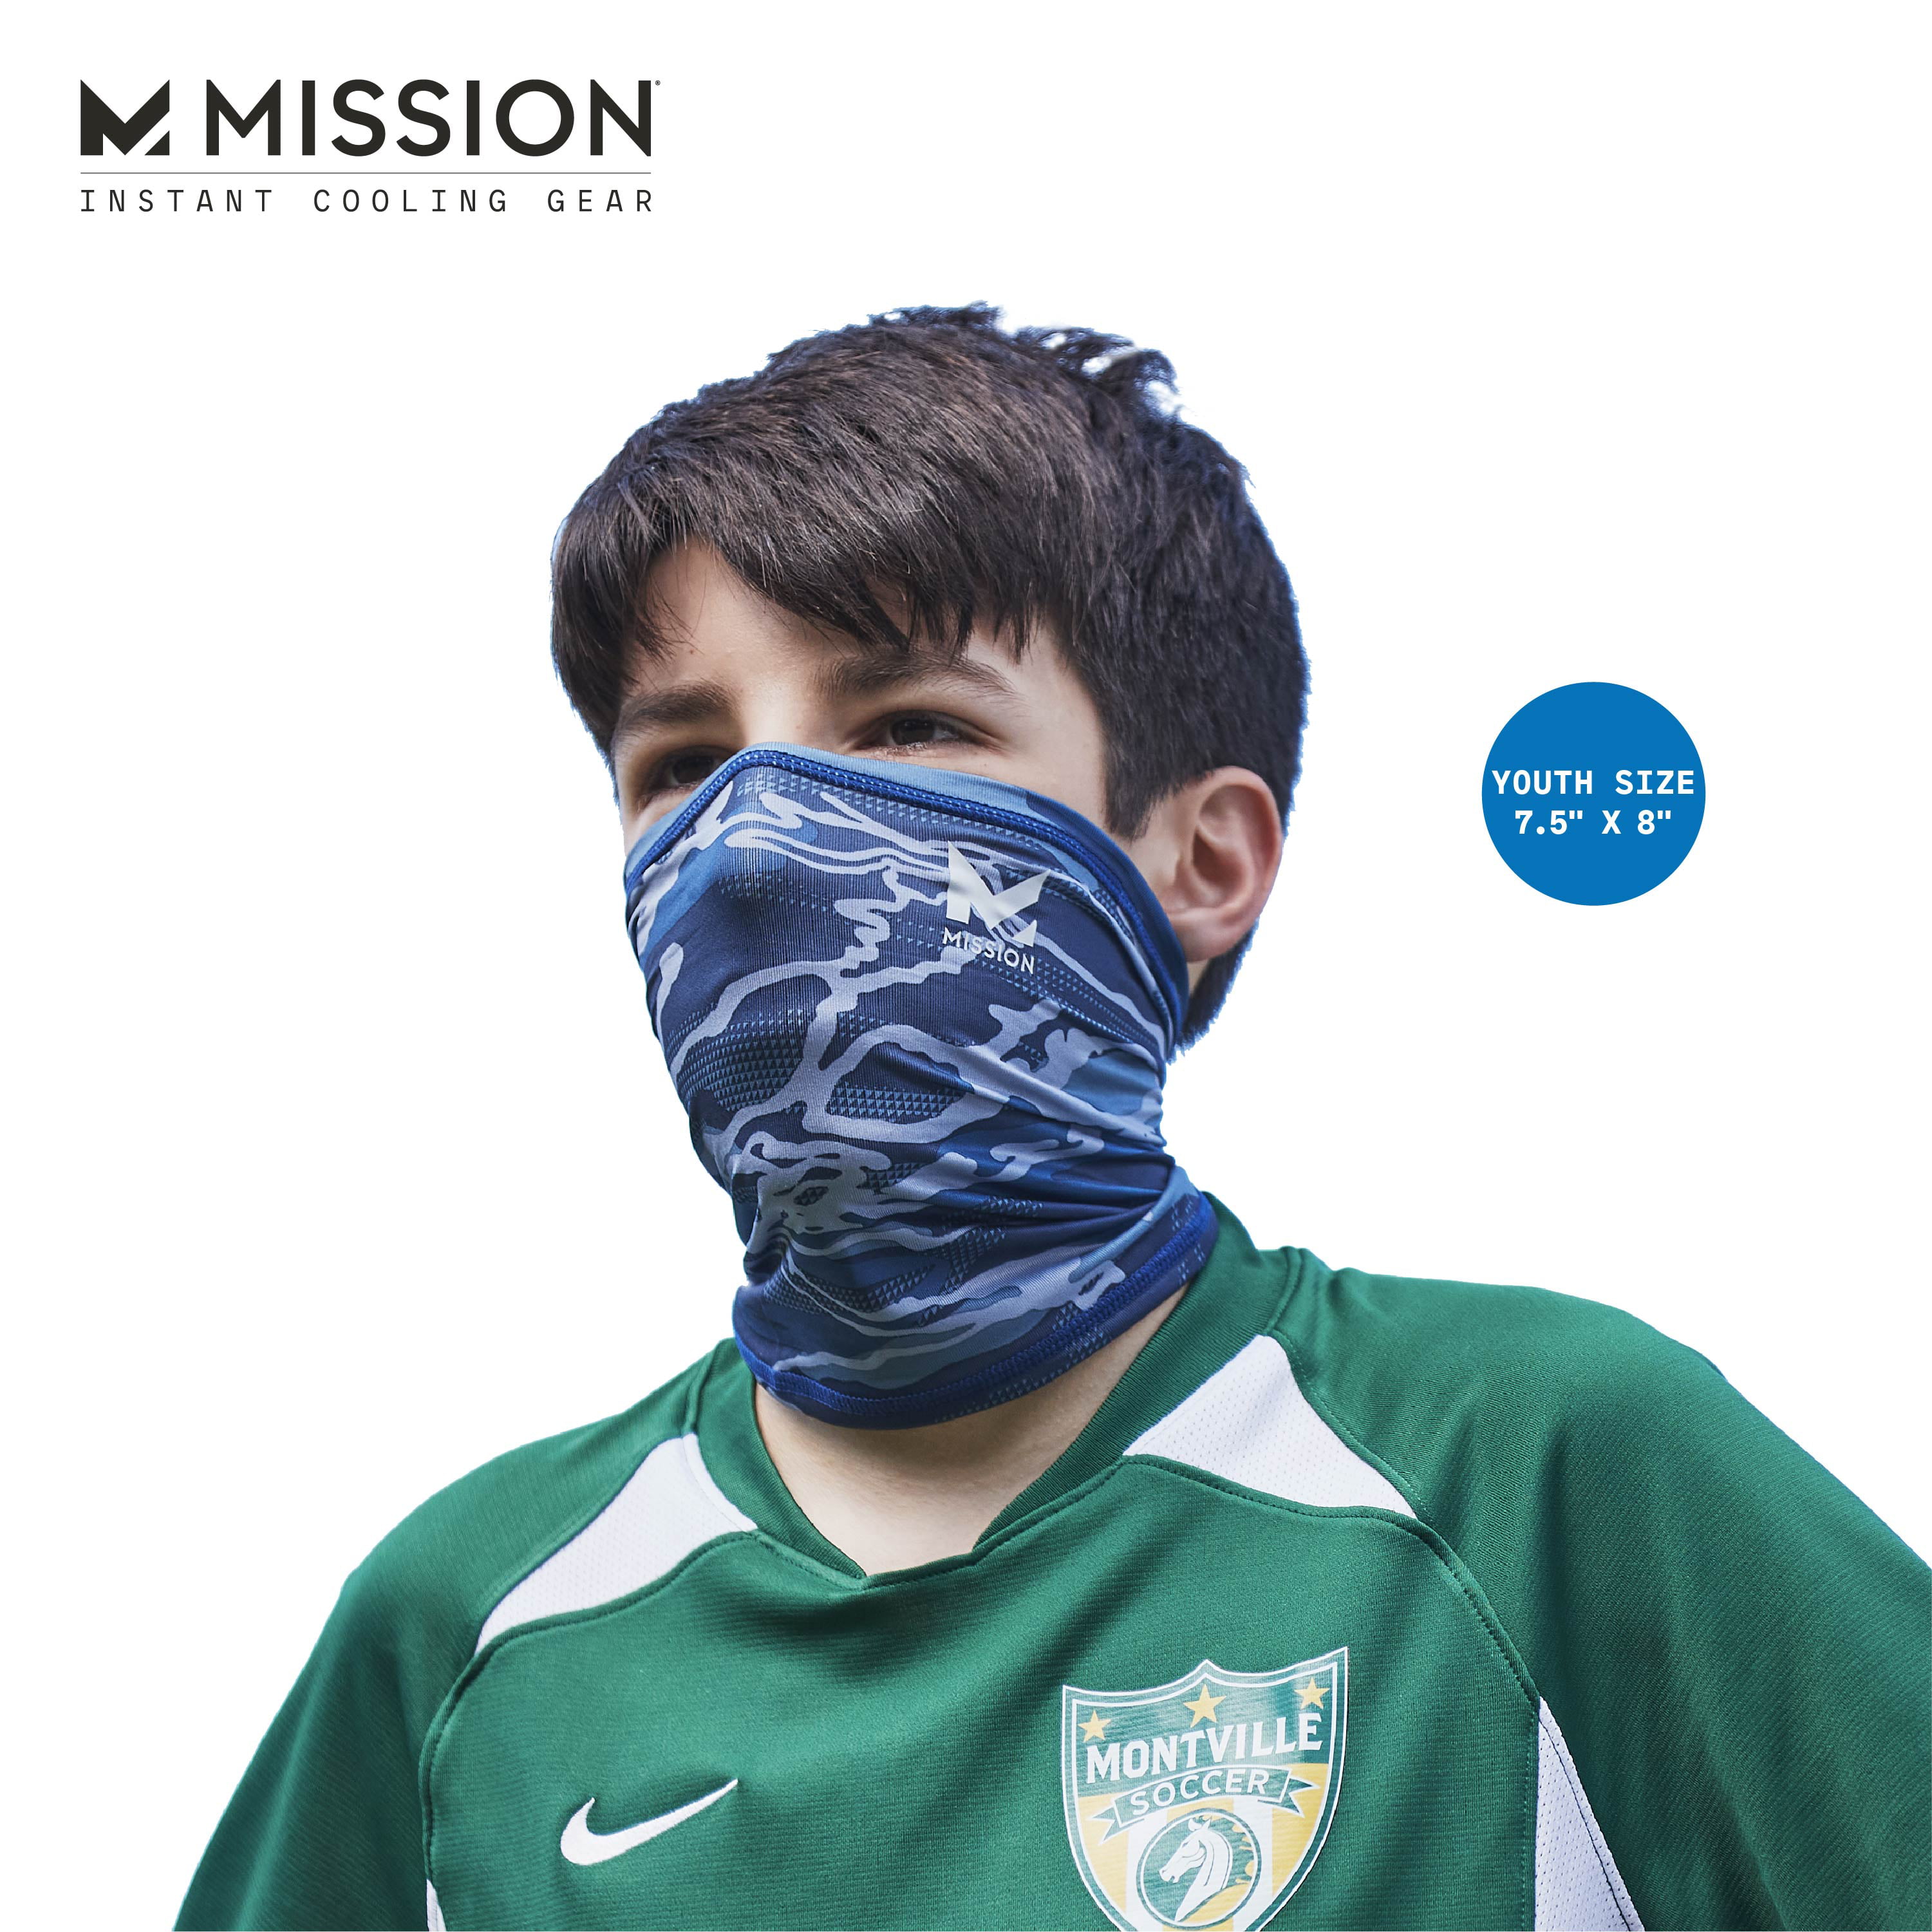 *NEW* MISSION NECK GAITER FACE MASK YOUTH COOLS UPF 50 COD BLUE MATRIX CAMO ARMY